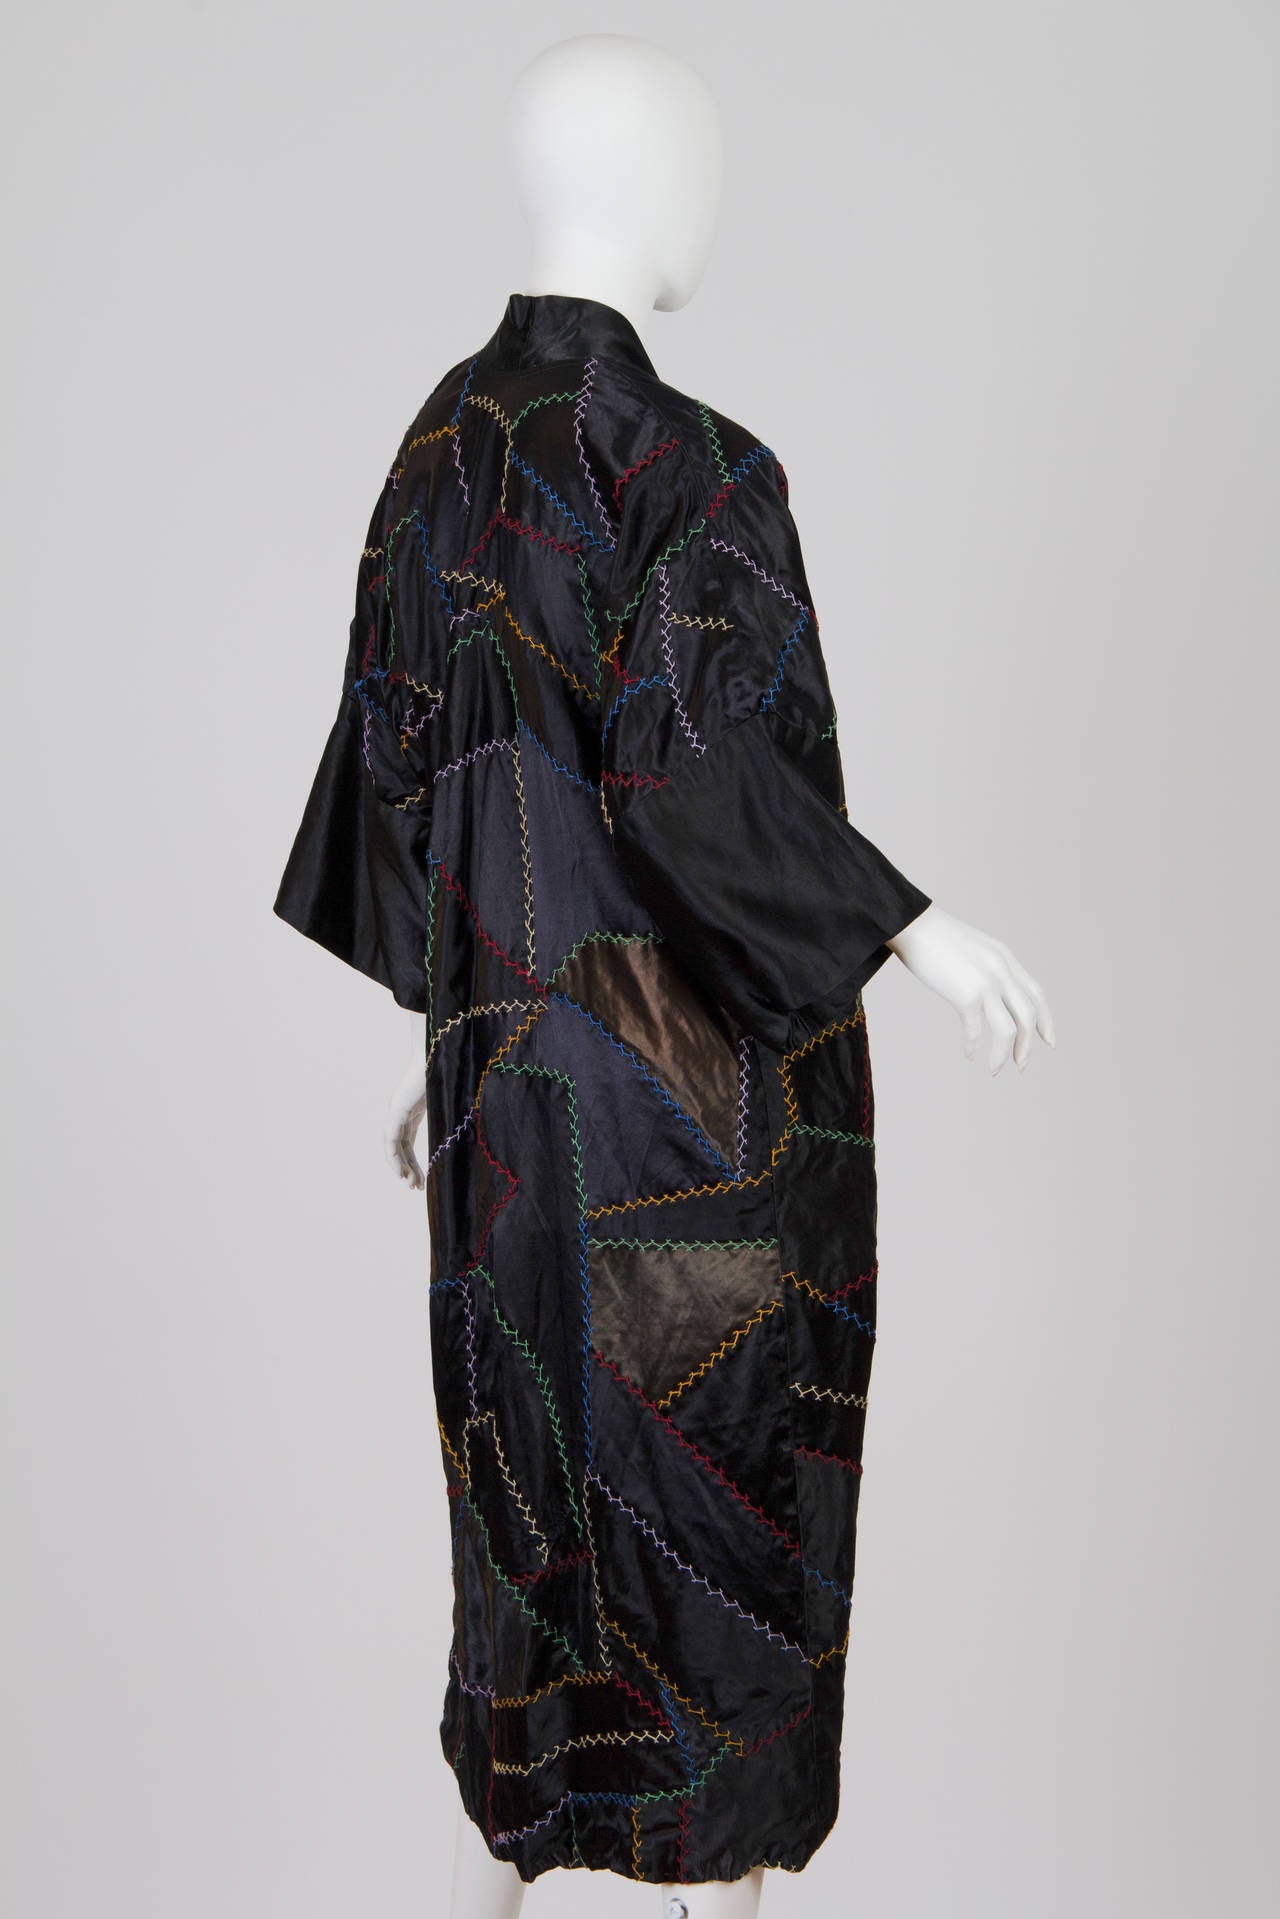 1920s Silk Crazy Quilt Patchwork Coat For Sale at 1stdibs